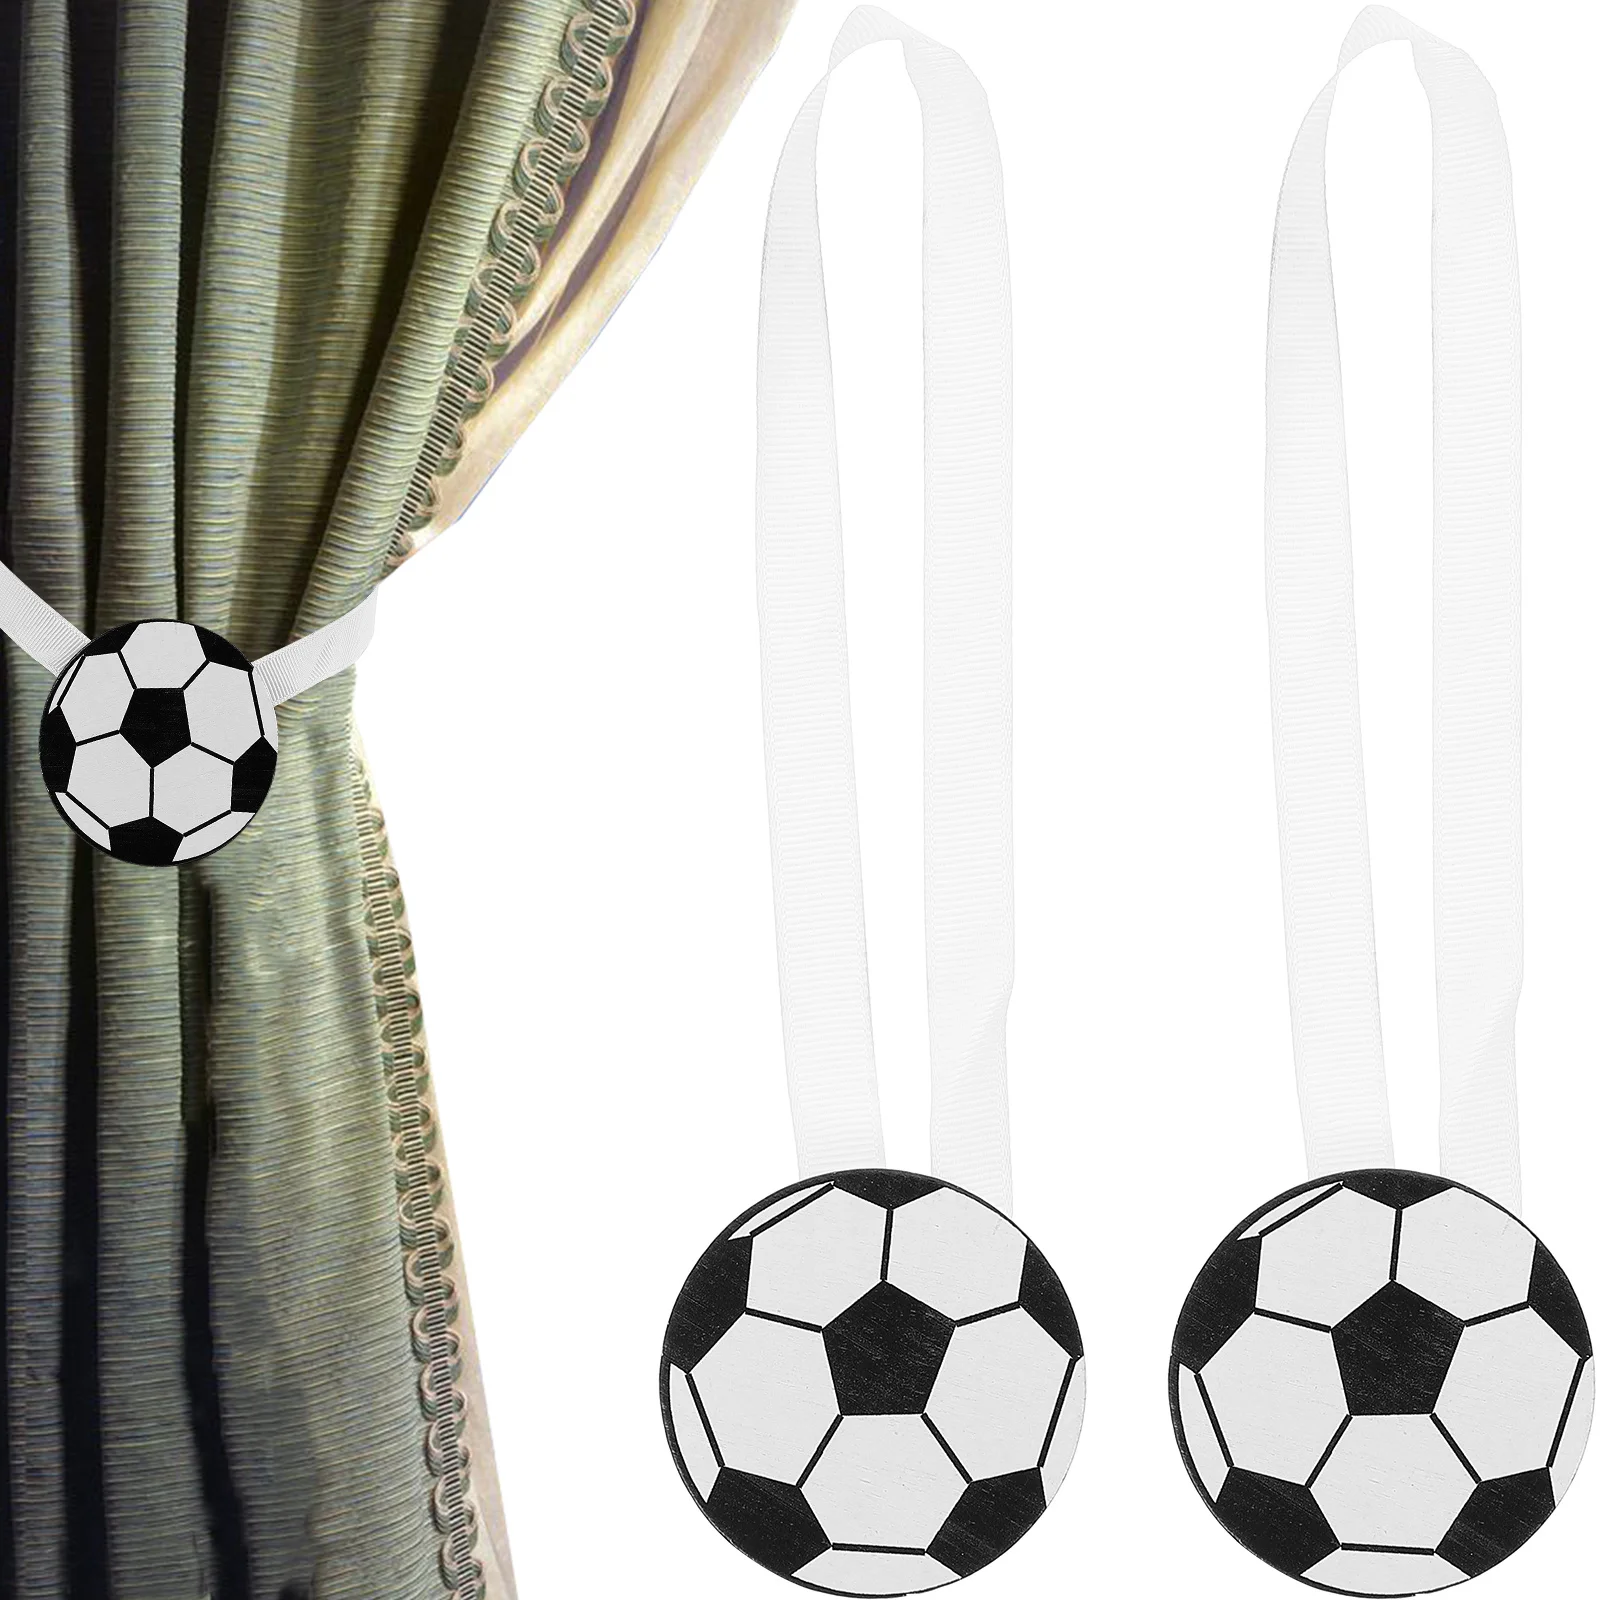 2 Pcs Soccer Curtain Holdbacks Magnetic Ties Window Curtains Drapery Kids Room Holders Buckle Party Favors Ropes